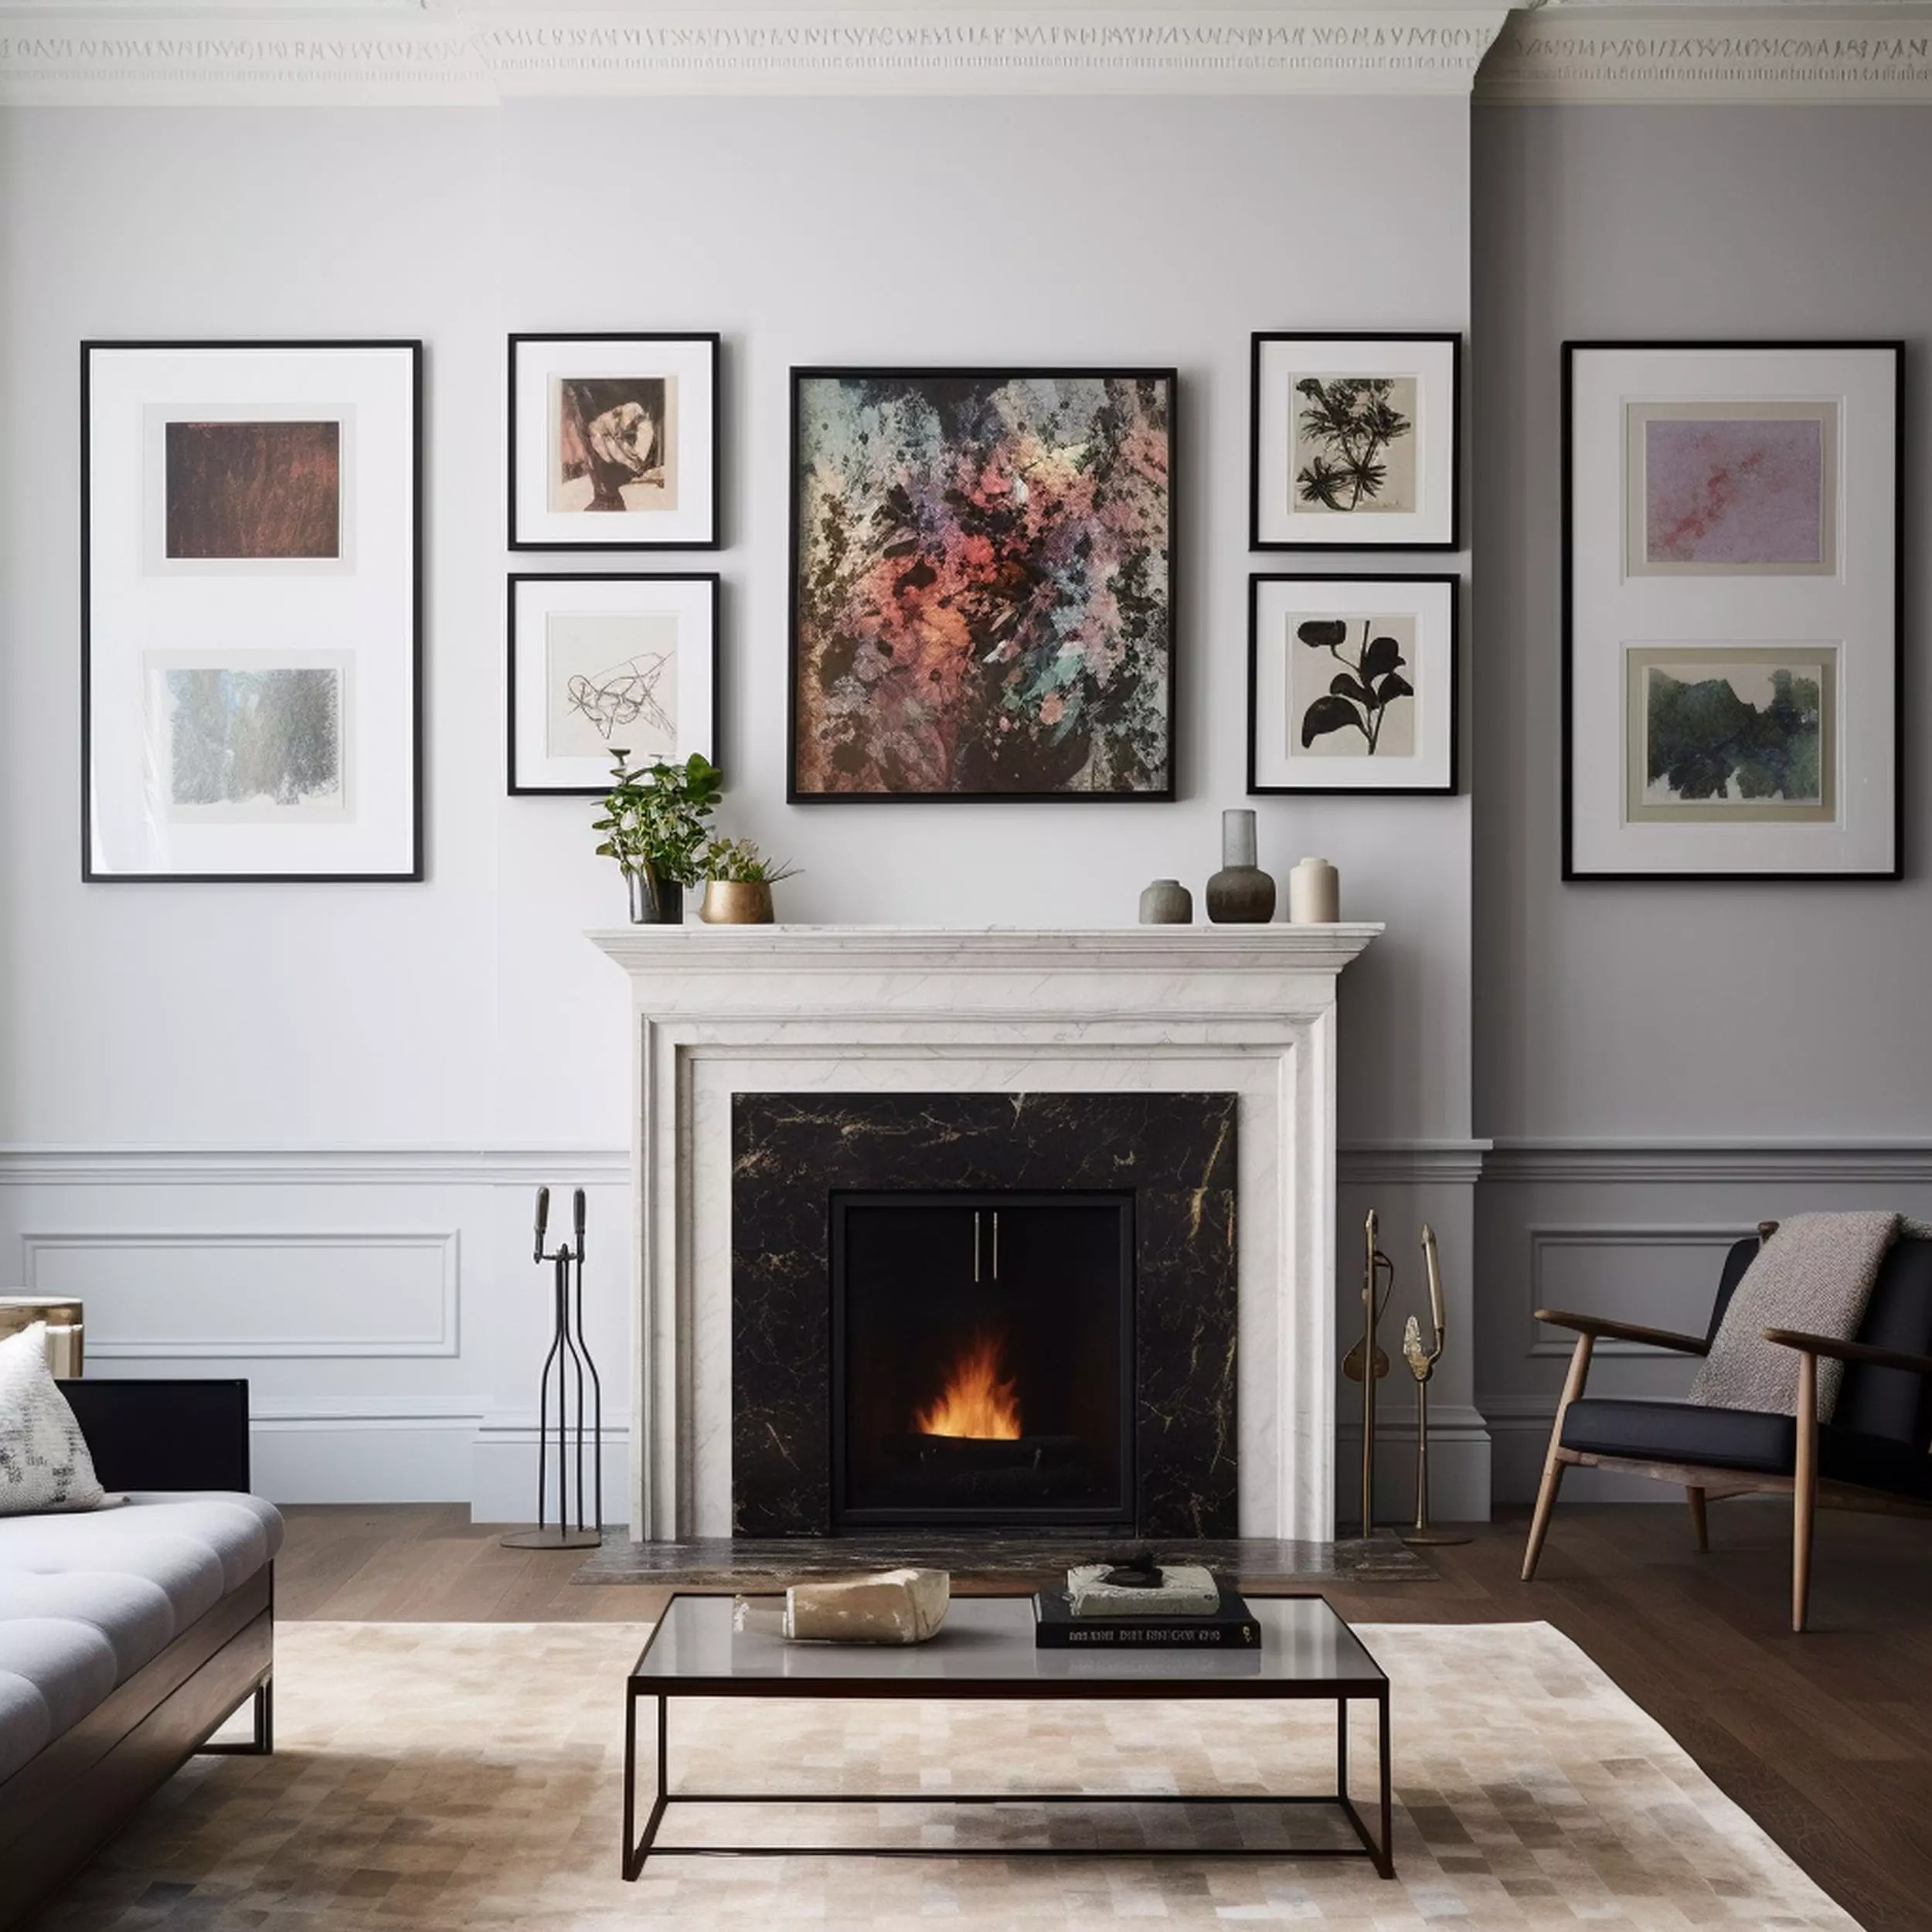 Fireplace With Abstract Gallery Wall Above it